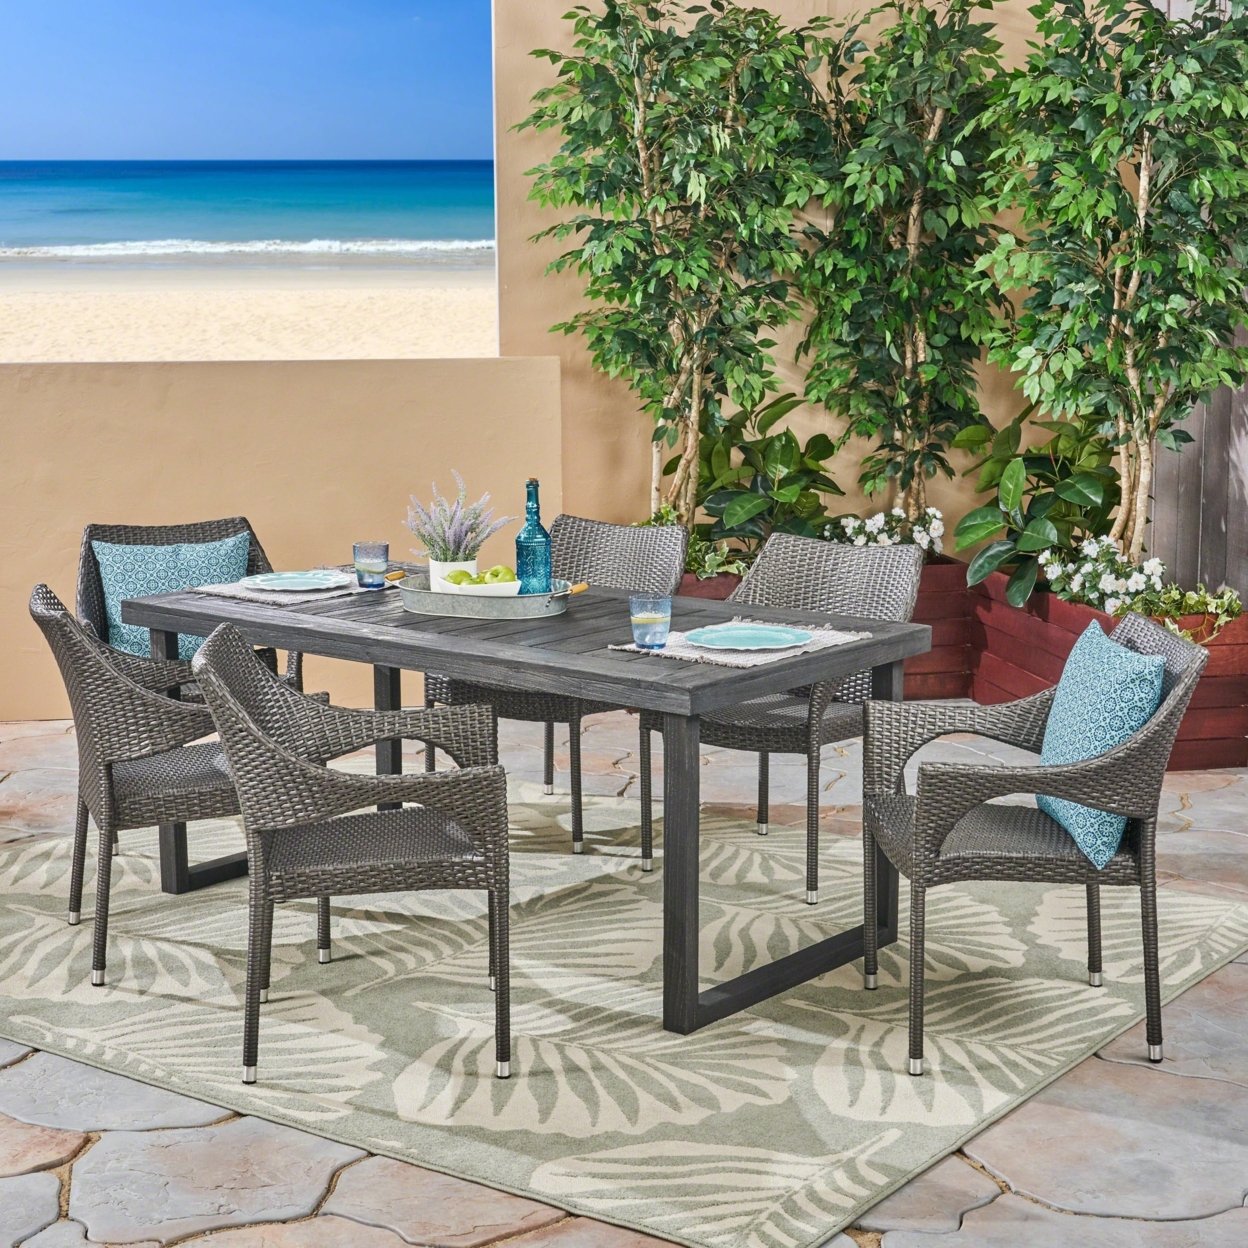 Joa Outdoor 7 Piece Acacia Wood Dining Set With Stacking Wicker Chairs, Sandblast Dark Gray And Gray